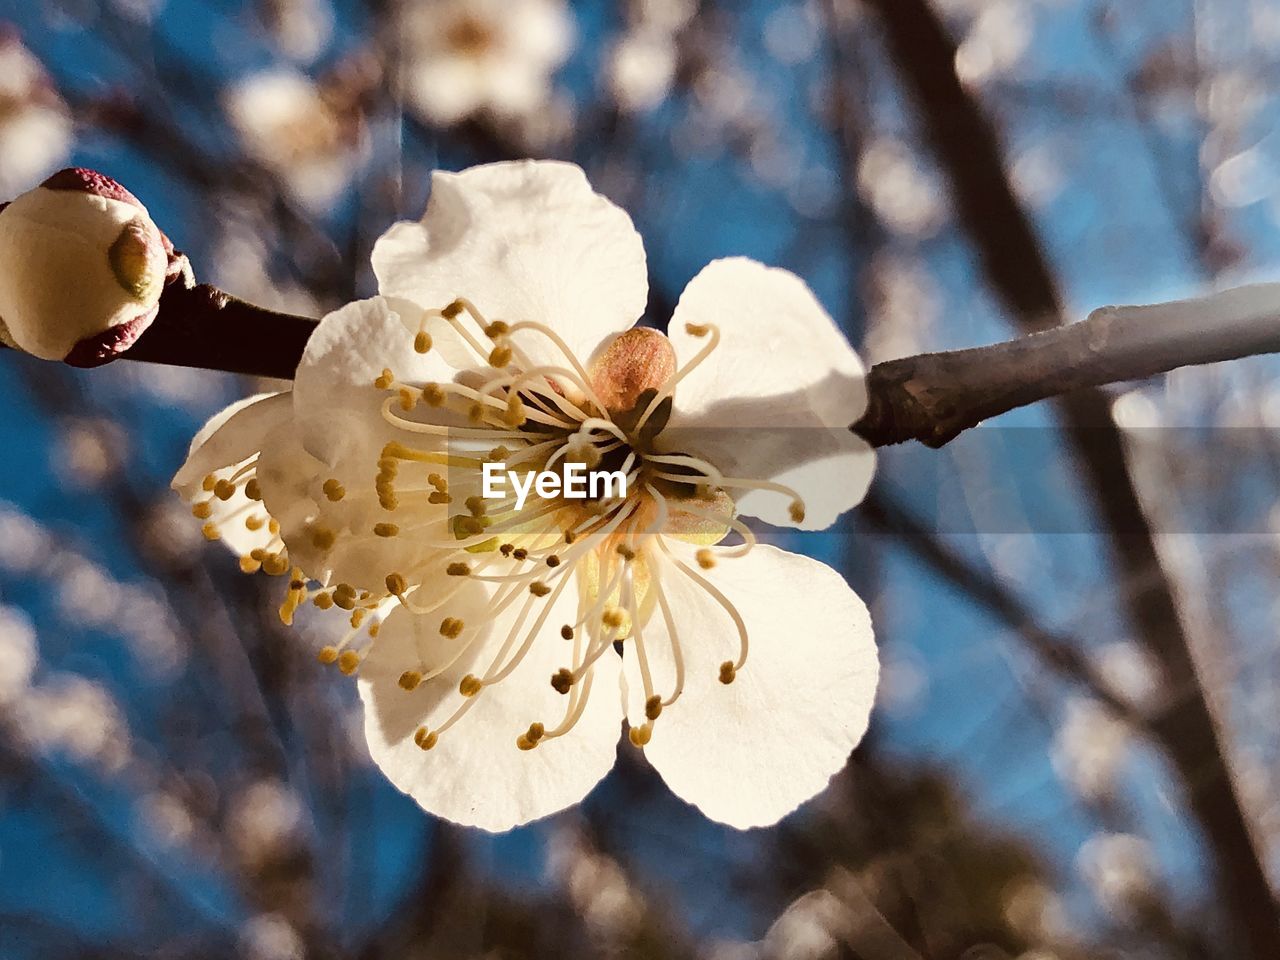 CLOSE-UP OF WHITE CHERRY BLOSSOMS ON TREE